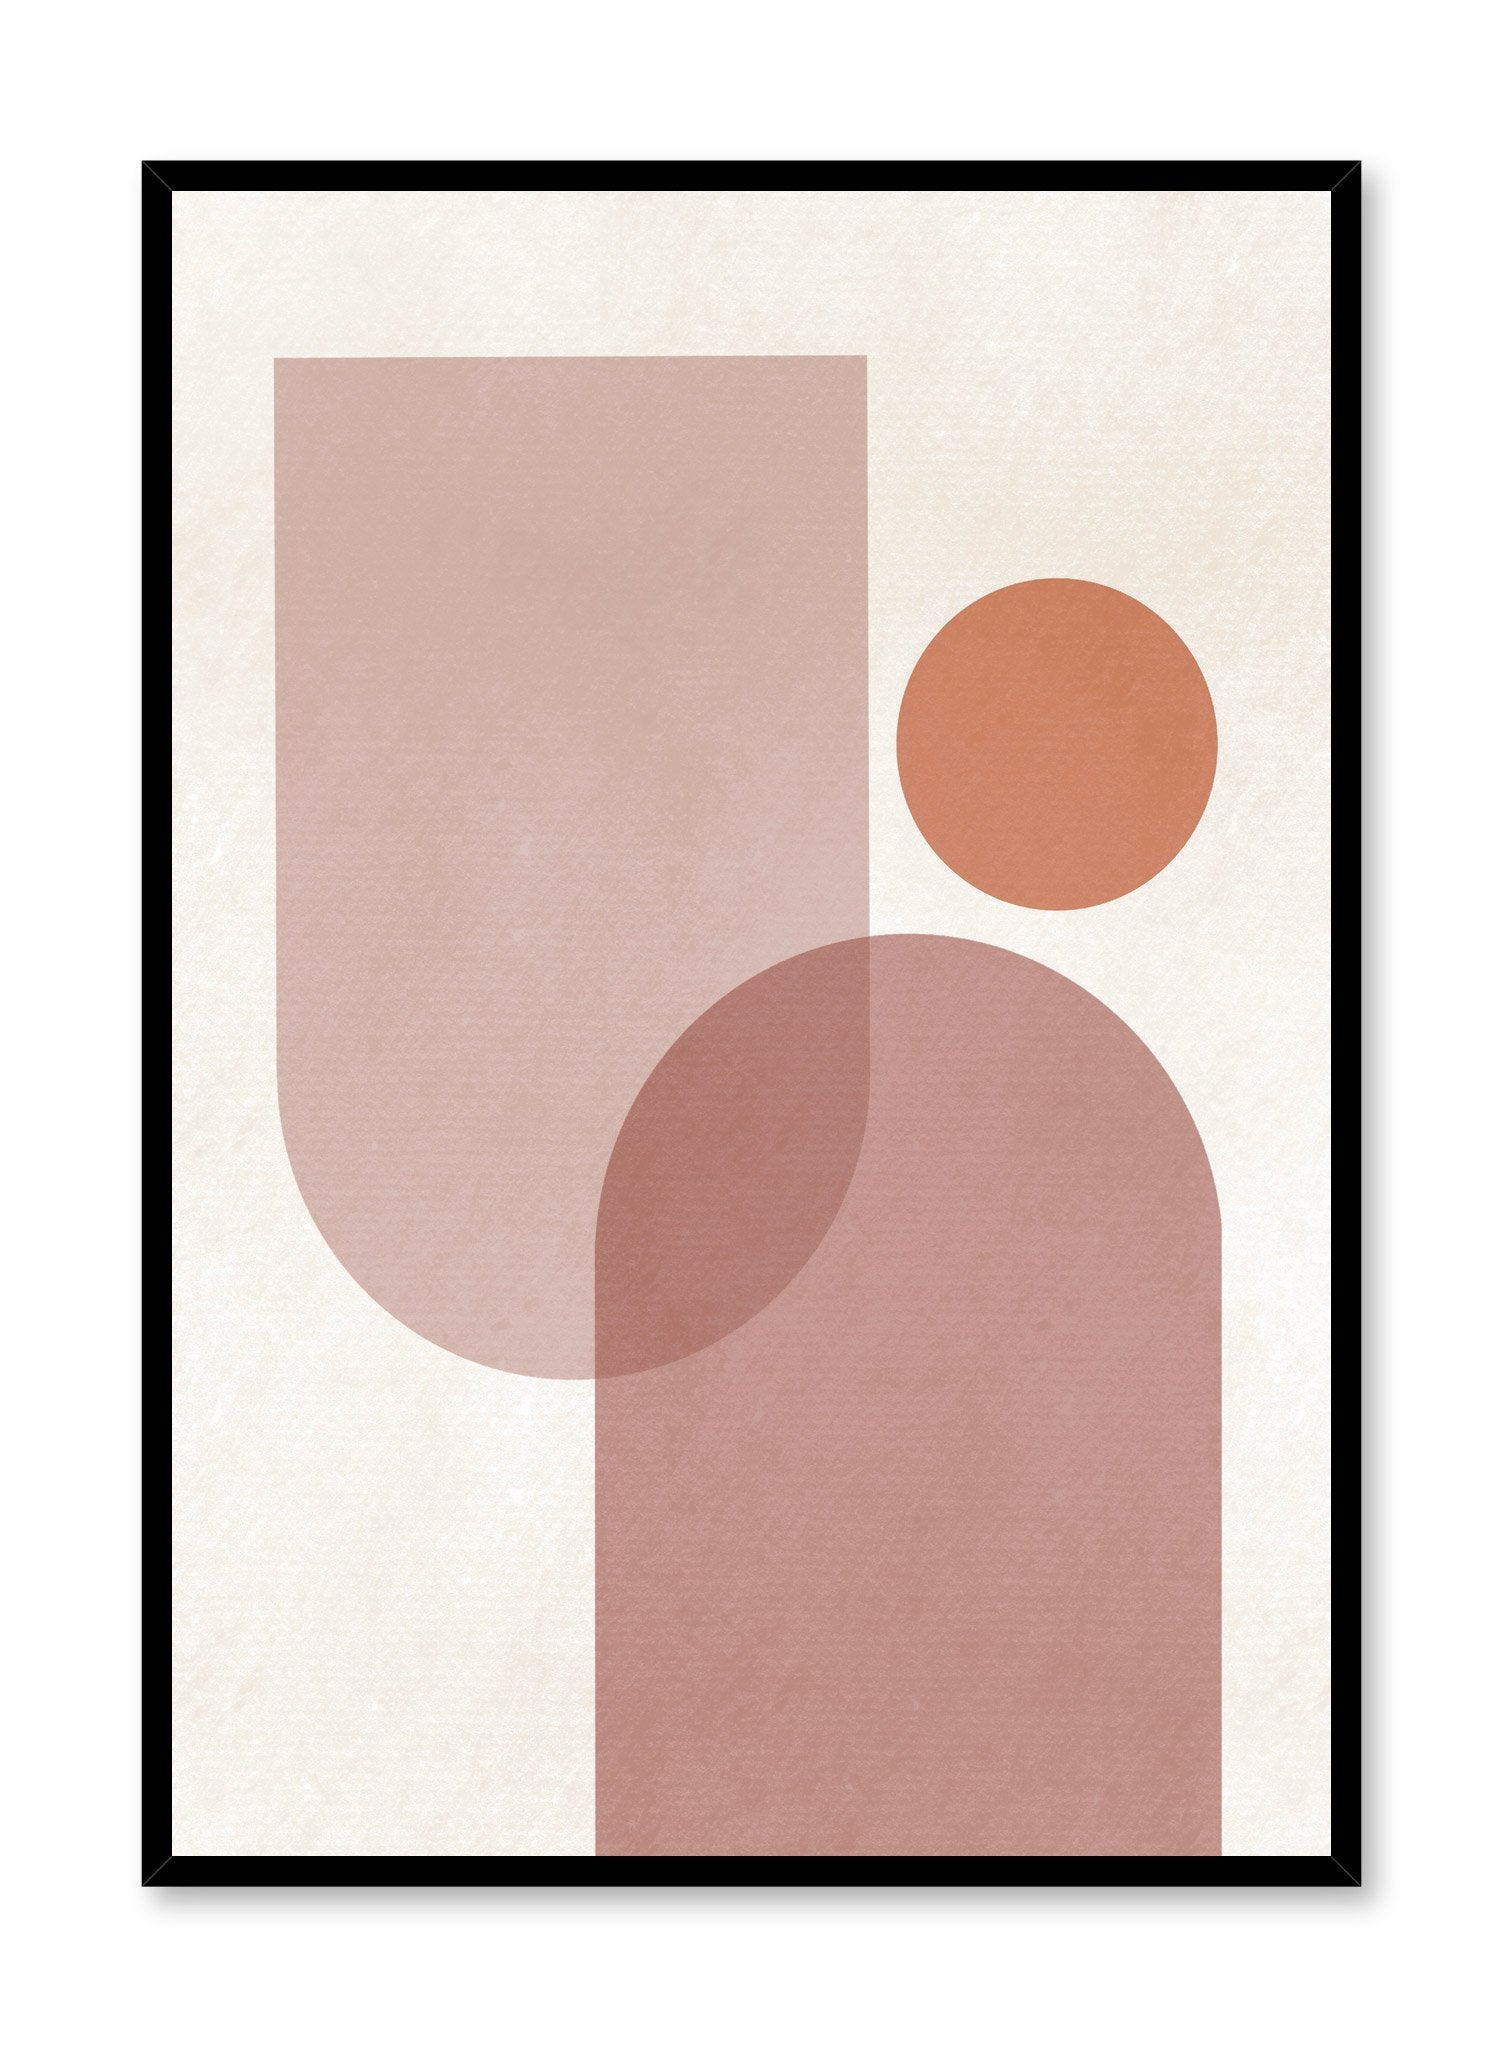 Modern abstract illustration poster by Opposite Wall with various shapes overlapping by Toffie Affichiste